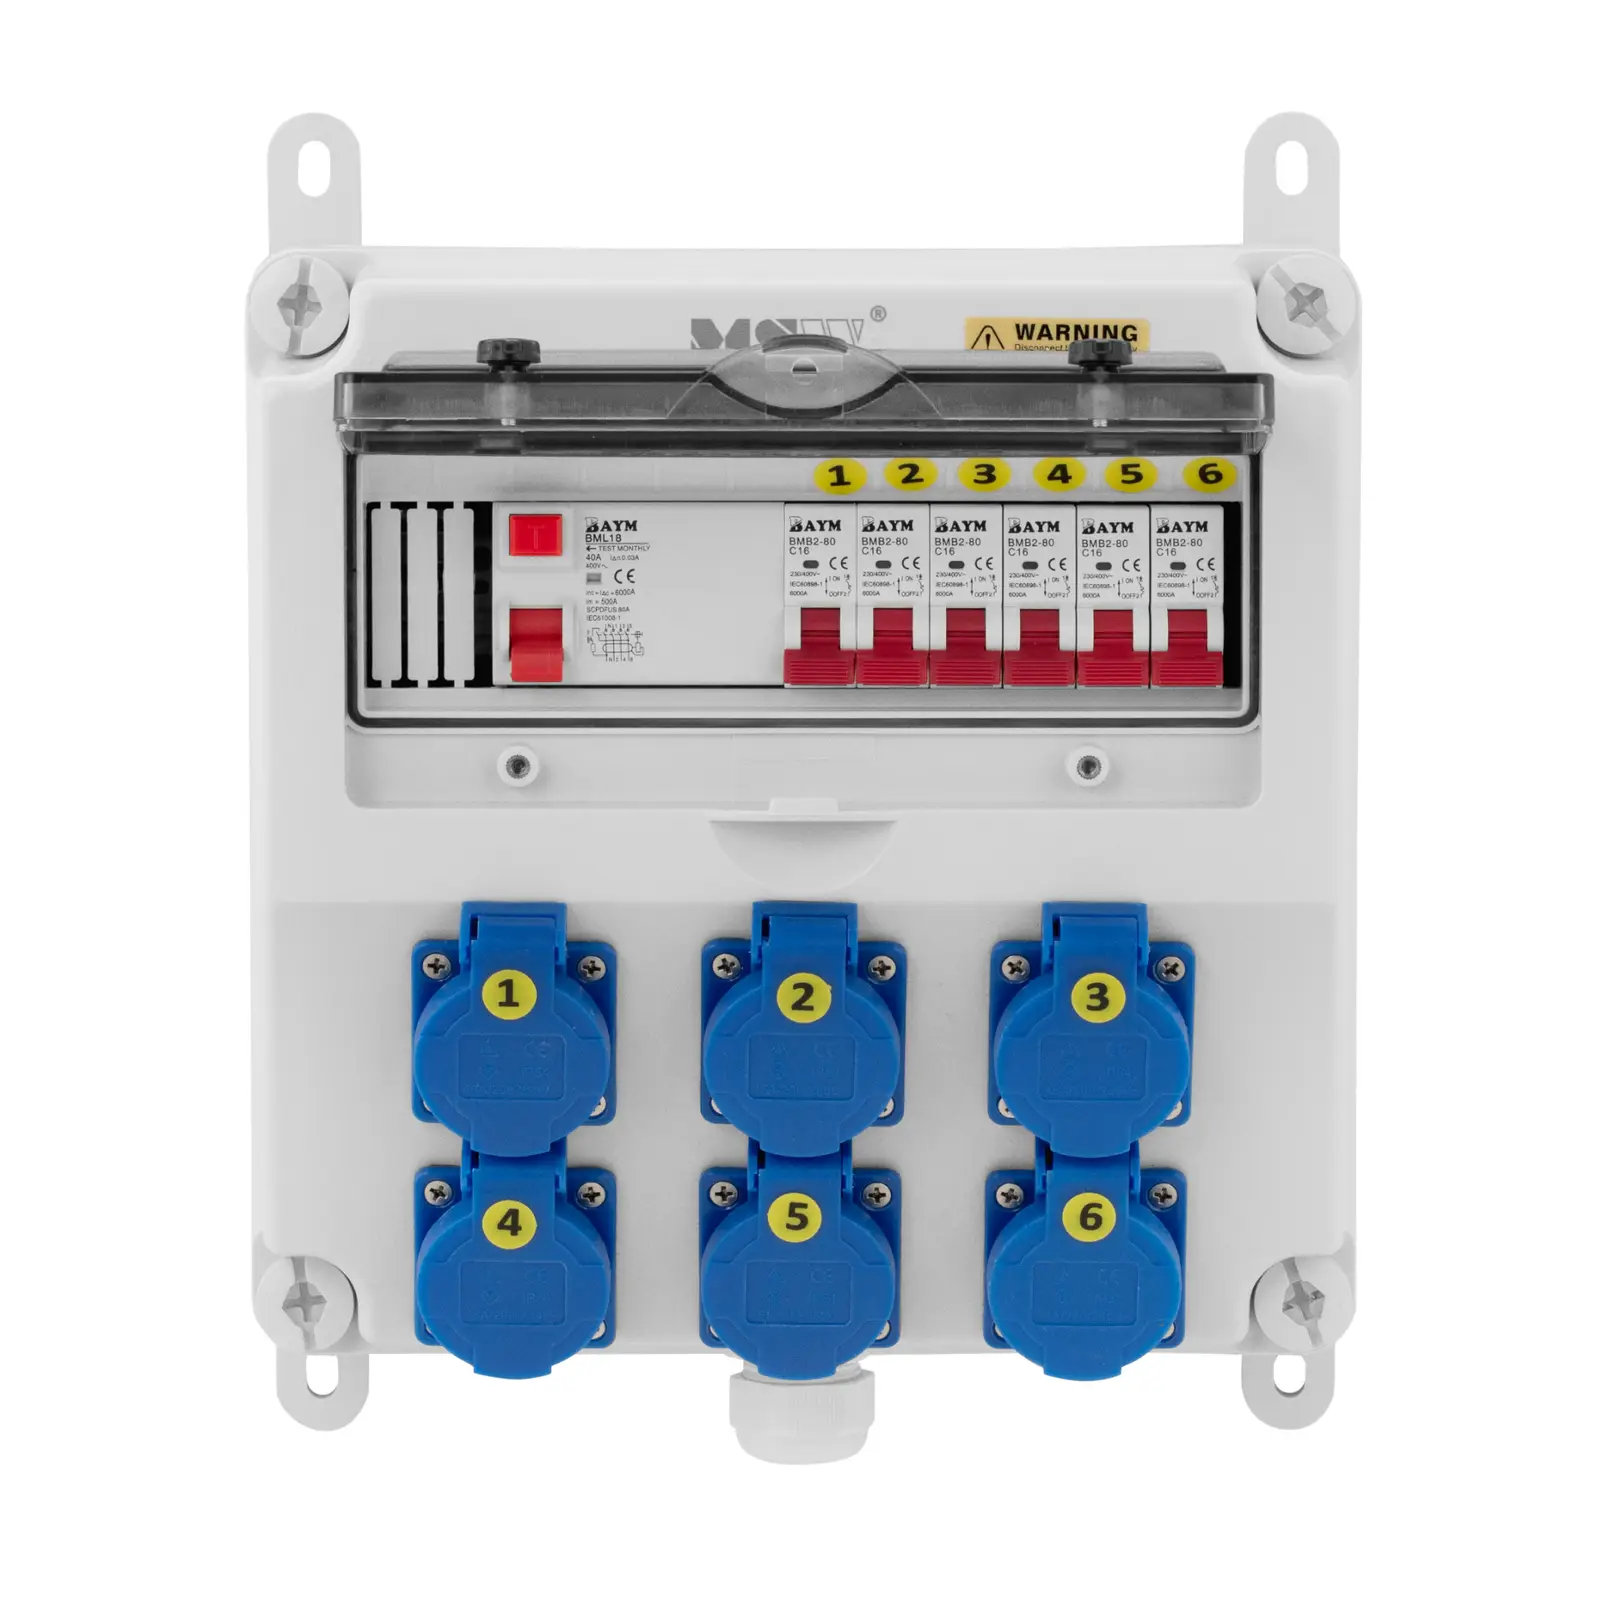 Power Distributor - 6 earthed sockets - RCD fuse - 6 circuit breakers